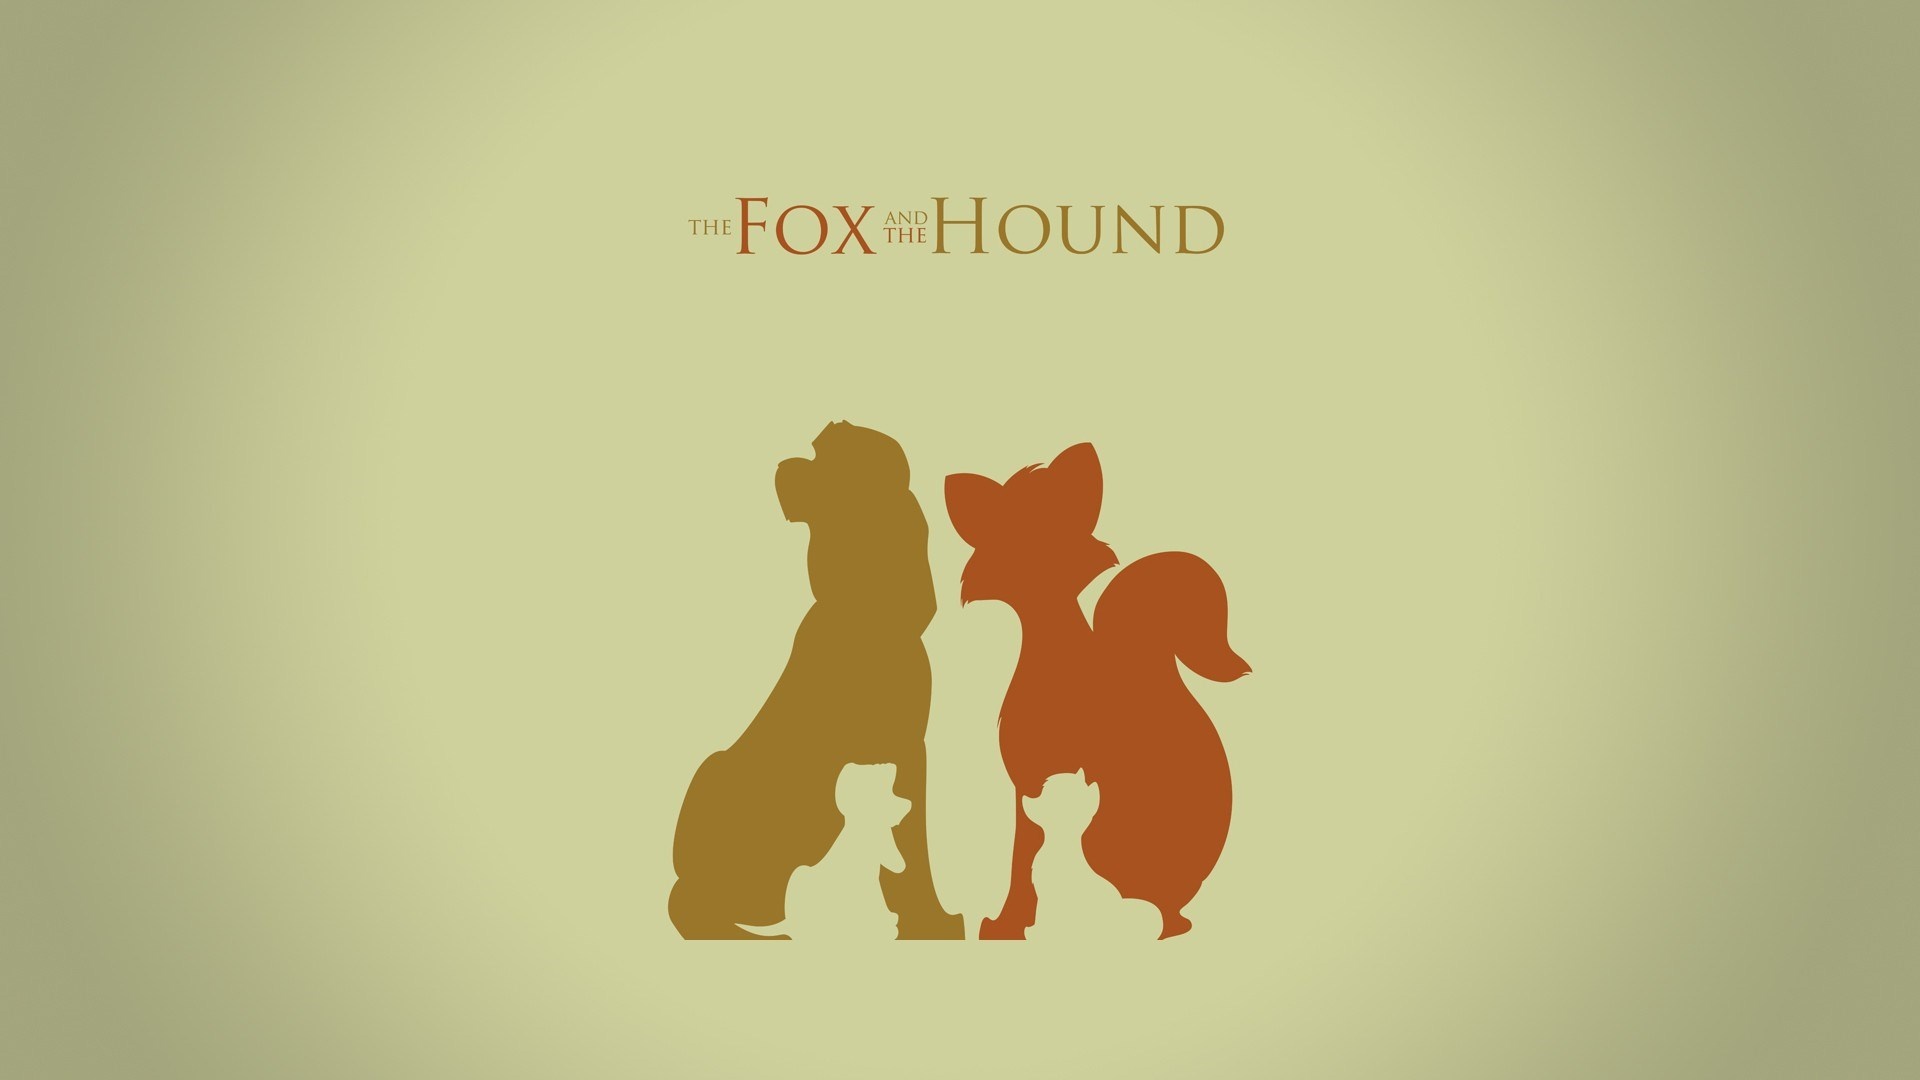 The Fox and the Hound, Artistic wallpaper, Fan-created artwork, Ambience, 1920x1080 Full HD Desktop